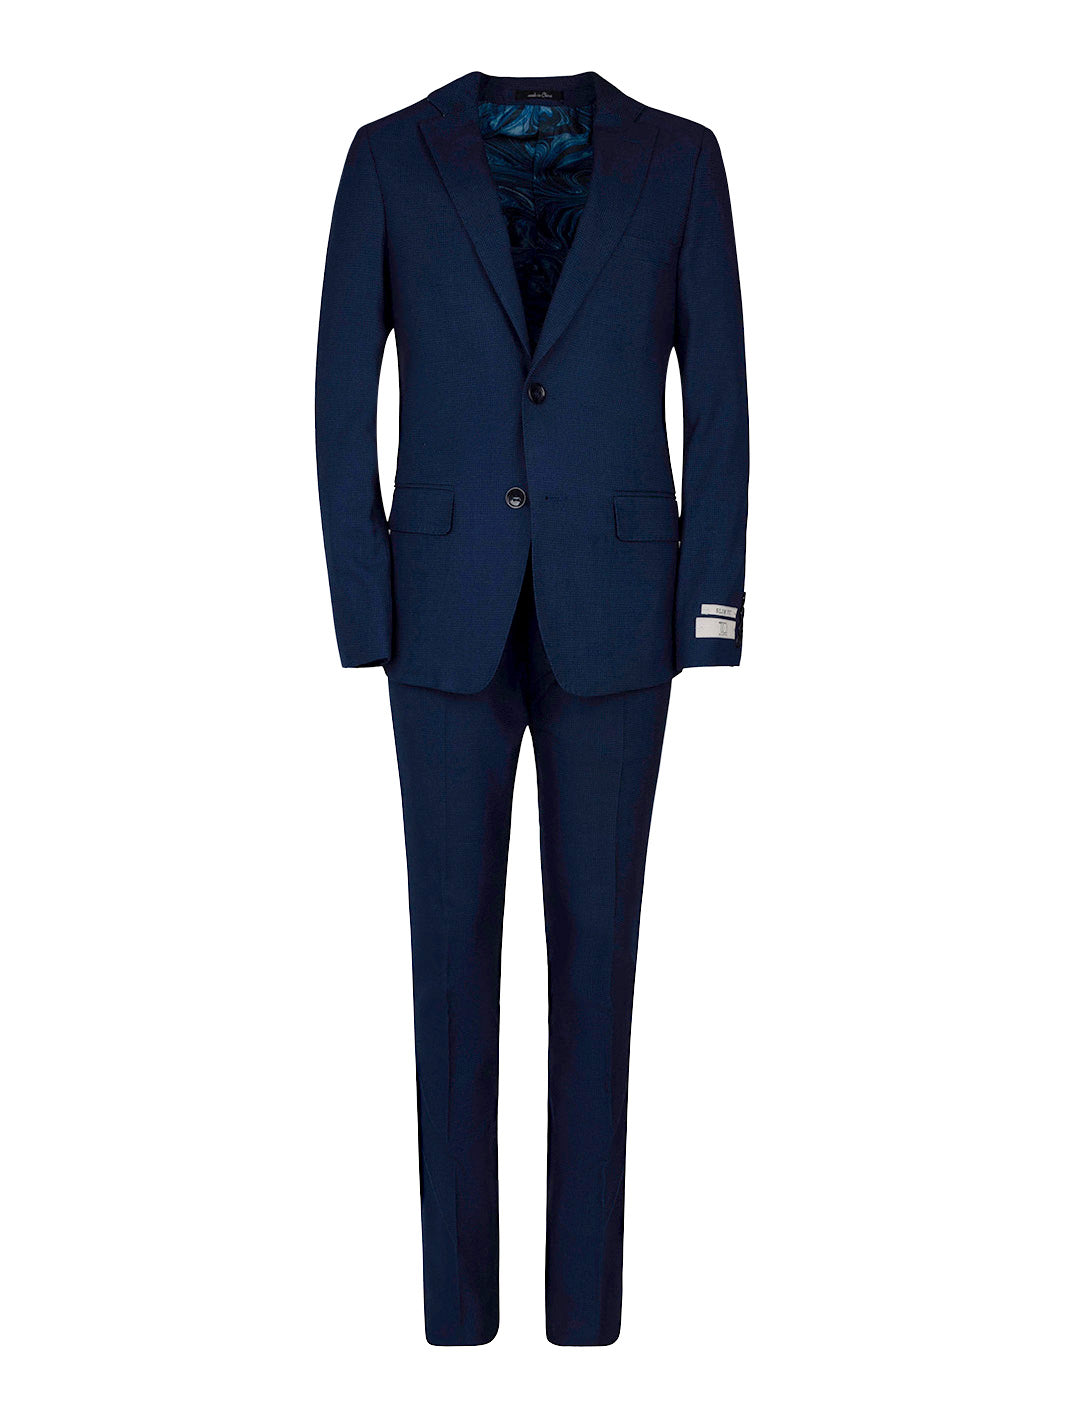 Boy's Fashion Suit - Blue Houndstooth